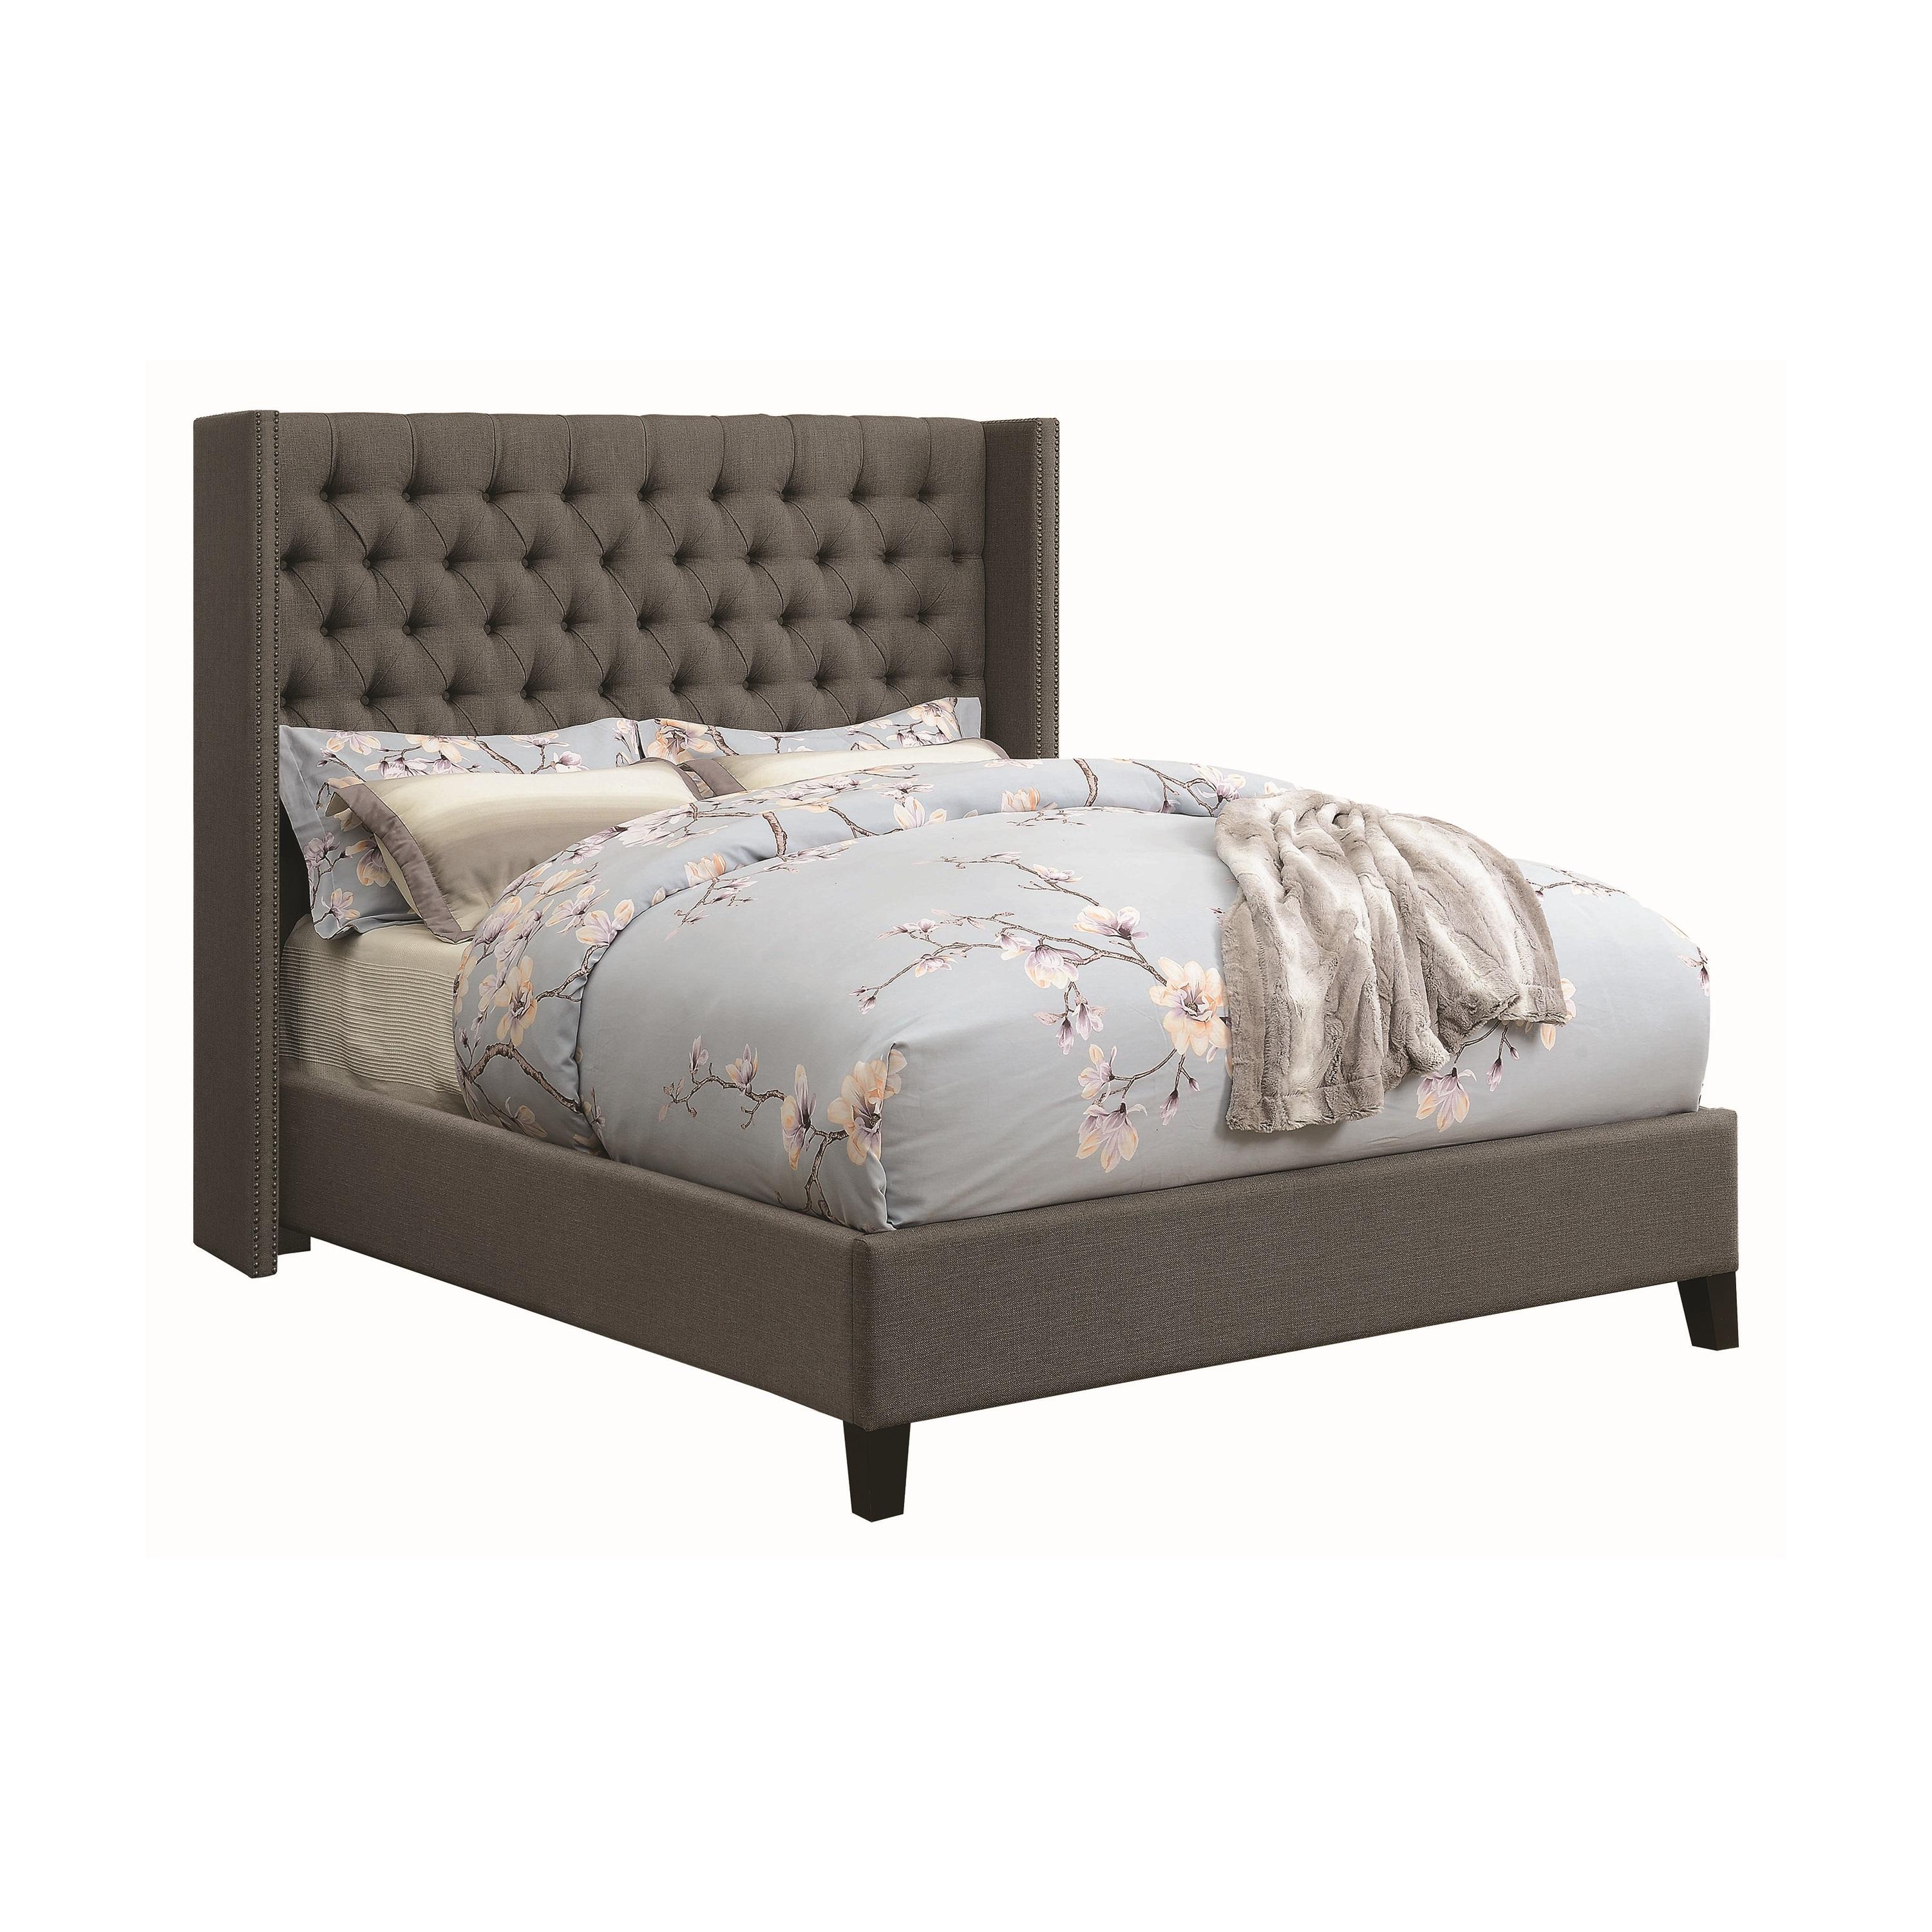 Contemporary Bed 301405KW Bancroft 301405KW in Gray Fabric